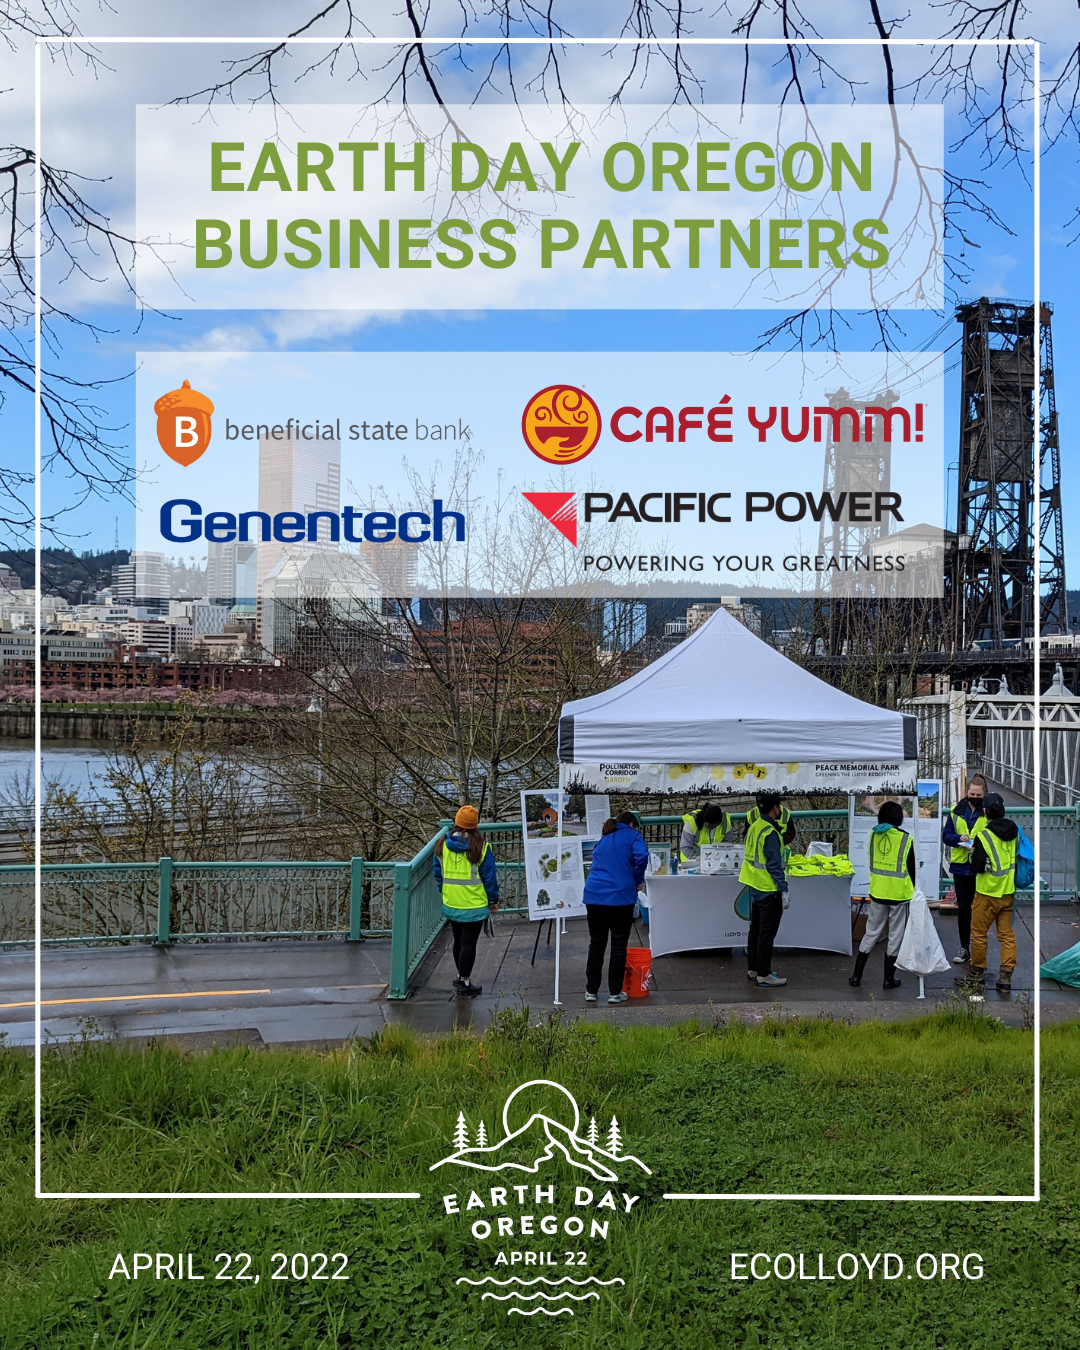 Image a group of volunteers in green safety vest checking in at a table outside at Peace Memorial Park. The image is overlaid with the text "Earth Day Oregon Business Partners:" and the logos of Beneficial State Bank, Cafe Yumm, Genentech, and Pacific Power